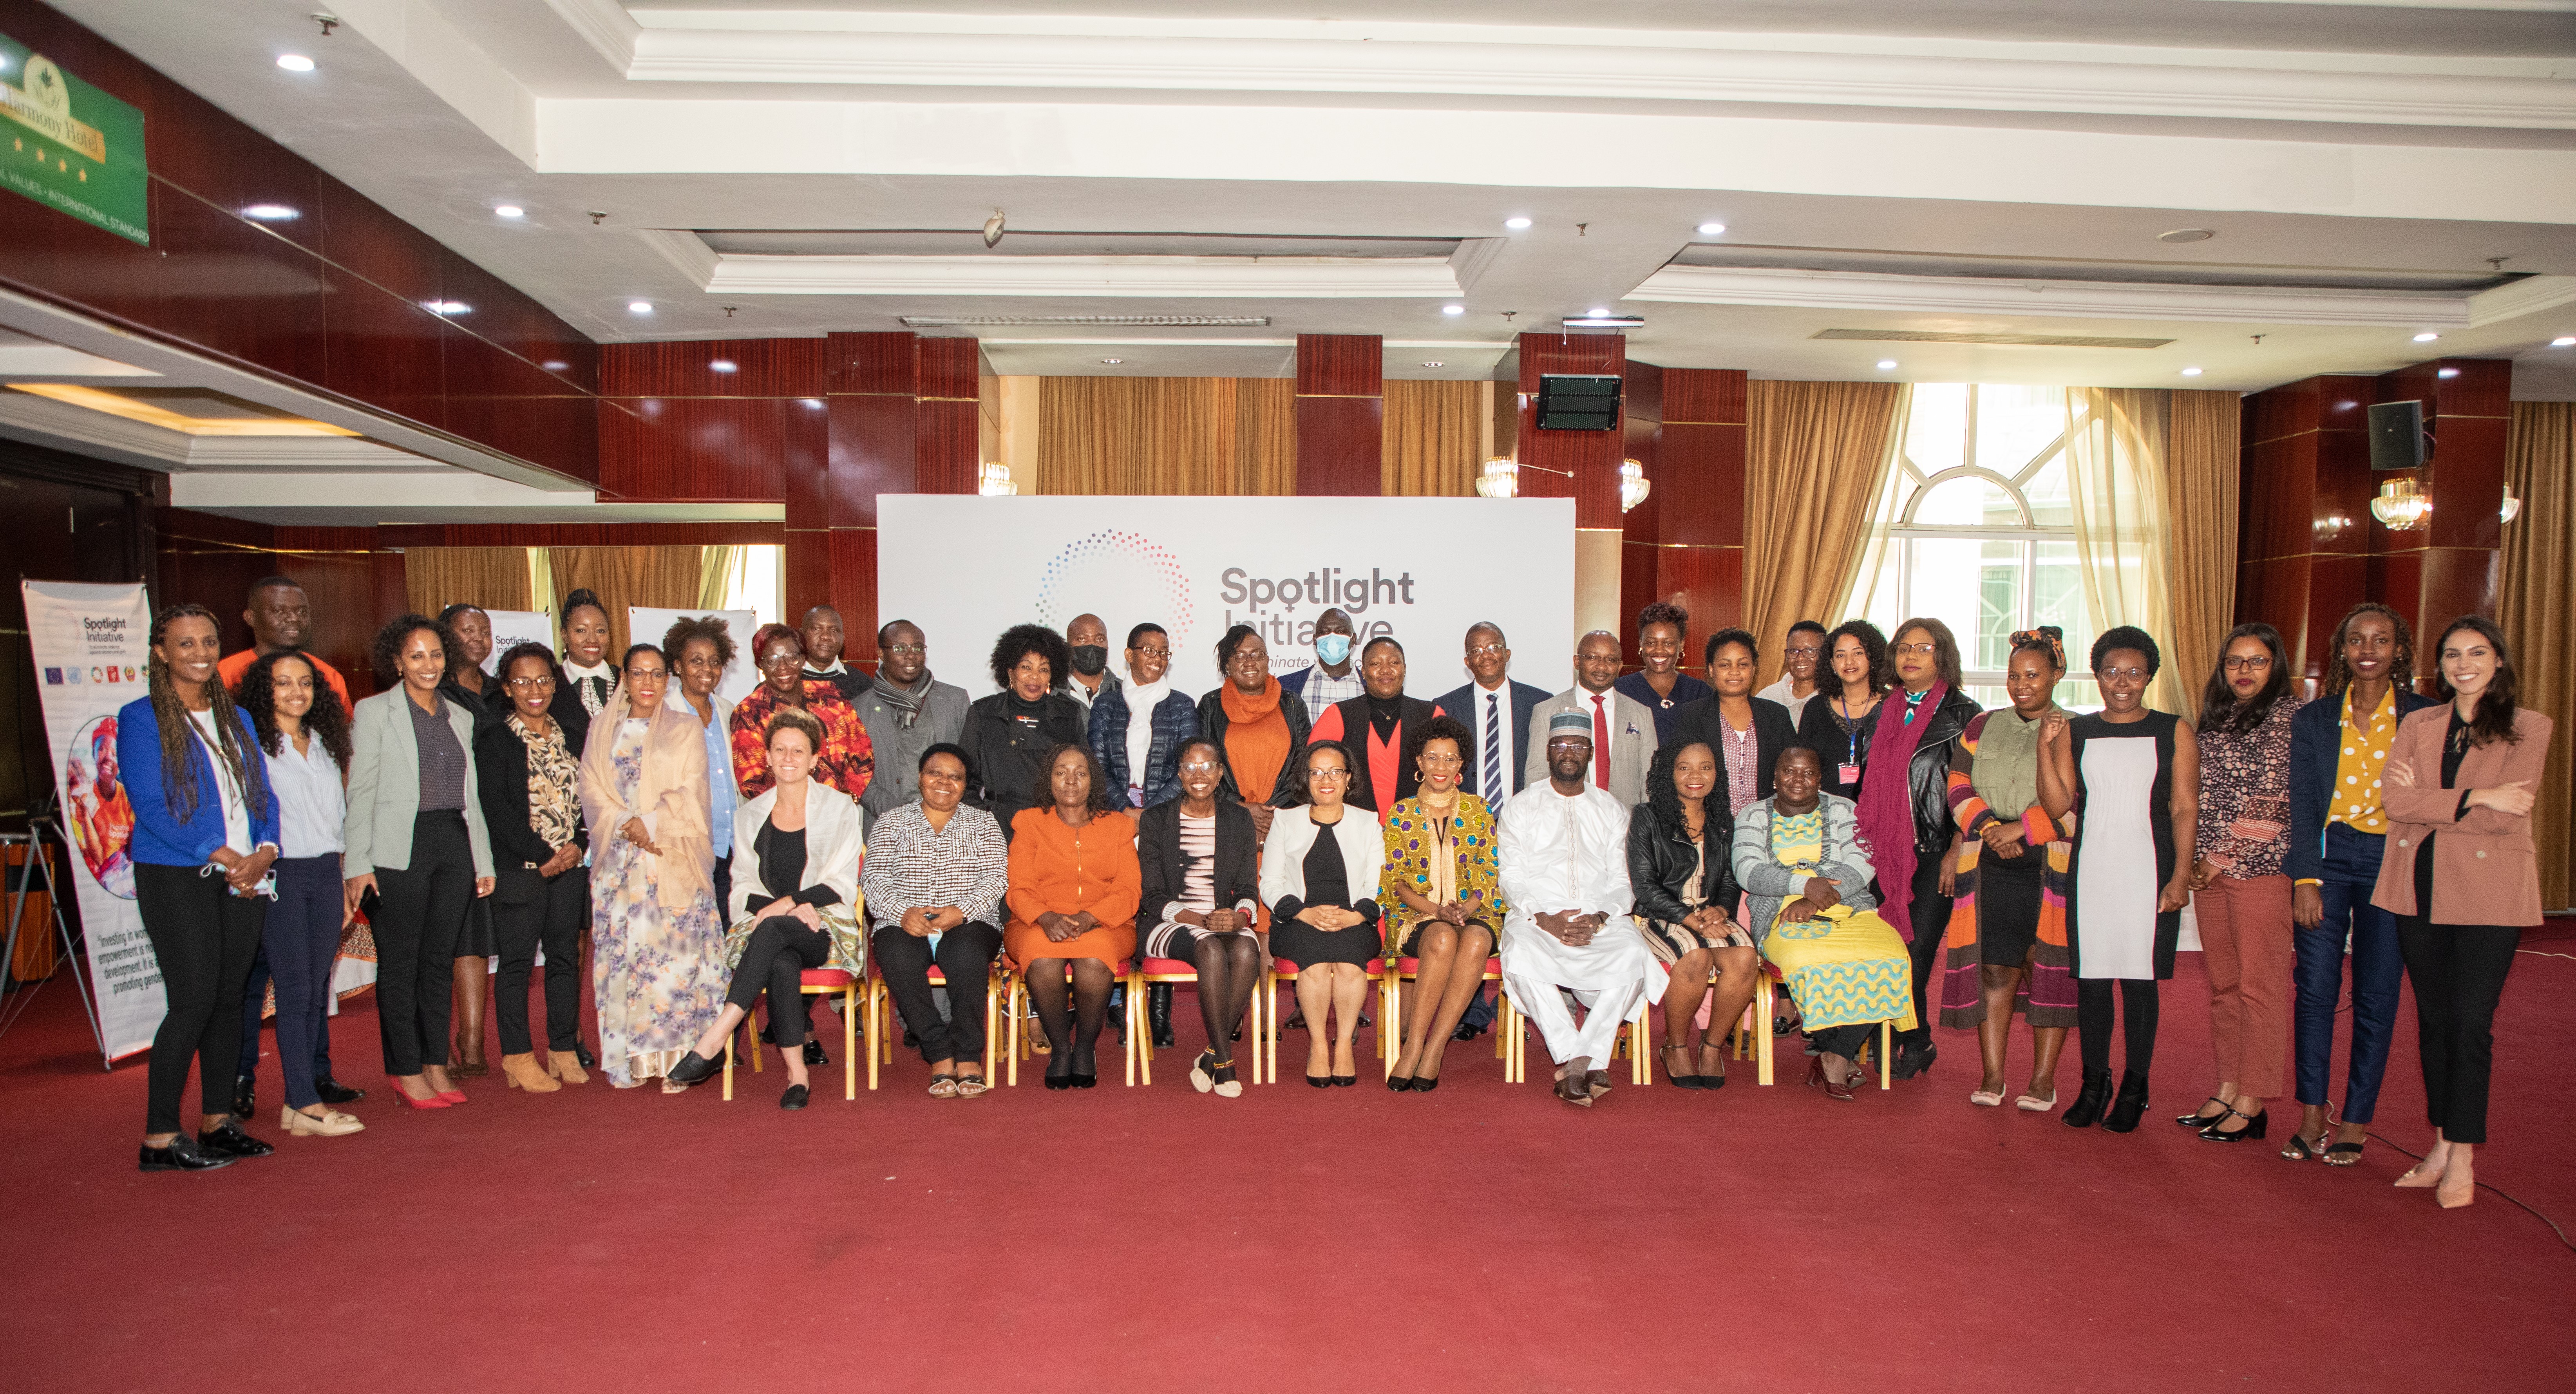 Participants and representatives from women’s rights groups, government, regional economic communities, the European Union (EU), the African Union Commission (AUC) and UN Agencies, convened for the “Spotlight CSOs Knowledge Sharing Forum” from 6 to 7 July in Addis Ababa, Ethiopia.